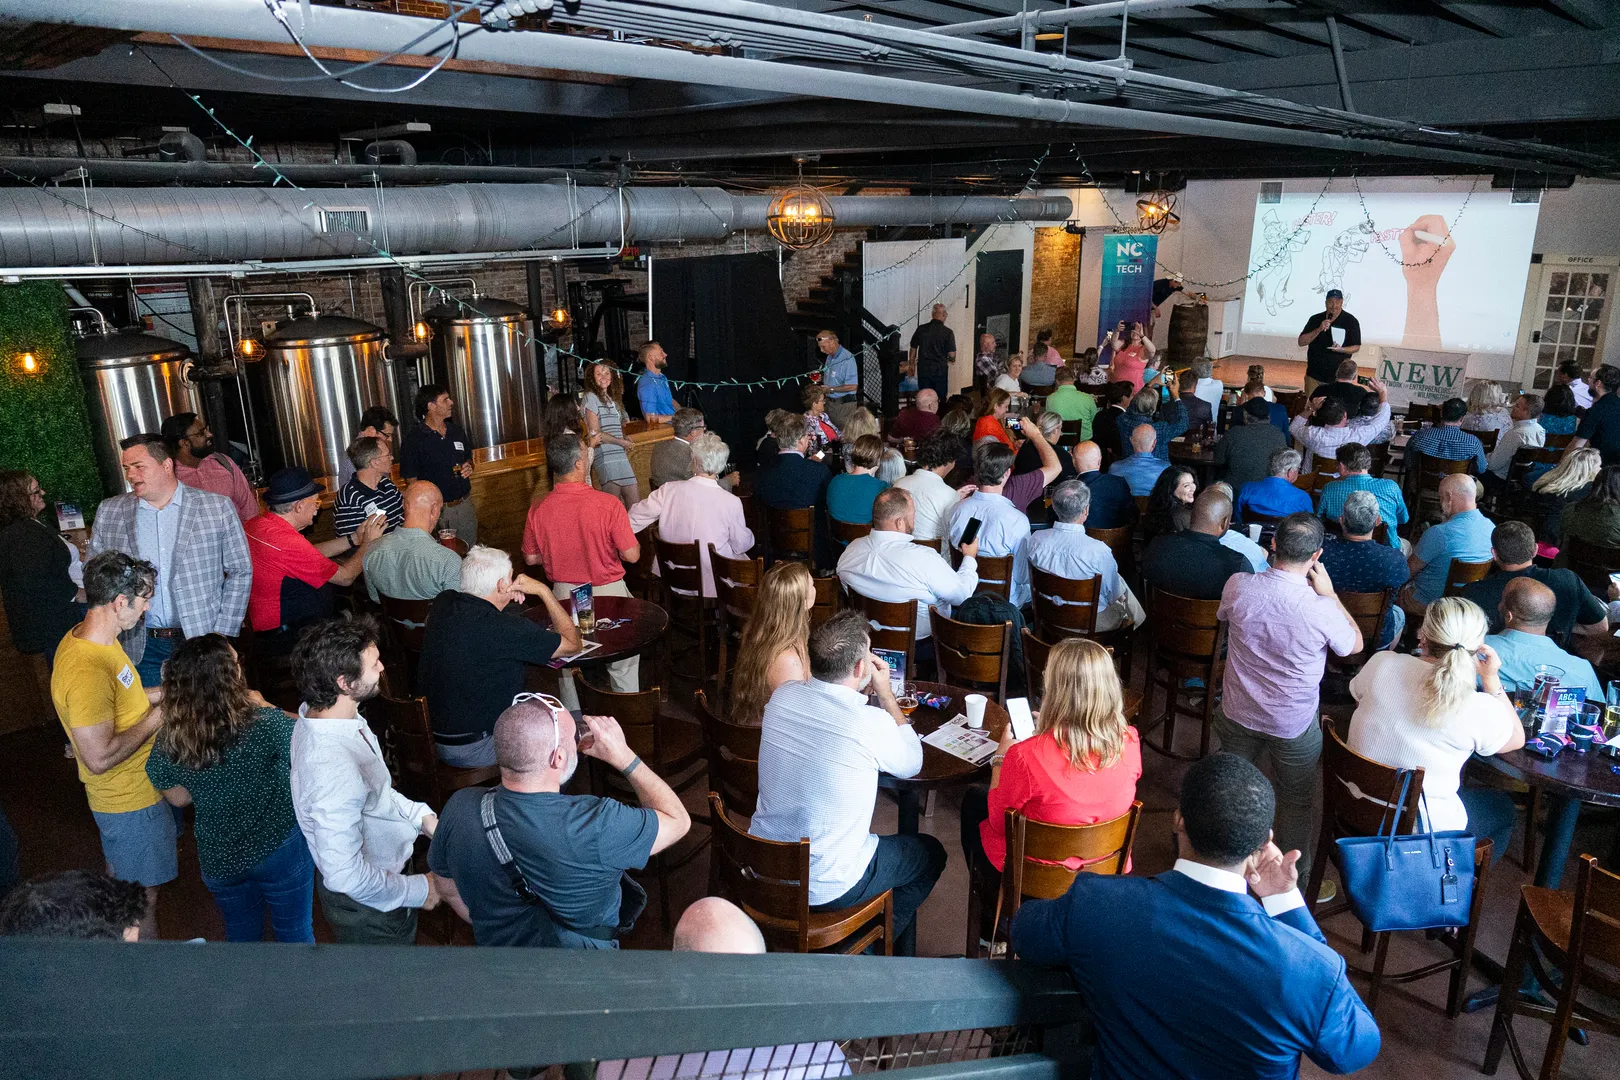 In Case You Missed It:
The ABCs of New Technology event in Wilmington, NC
Hosted by the Network of Entrepreneurs Wilmington and NC Tech.
---
Over 250 people in attendance (the largest monthly event in the state). Founders and CEOs of local startups (Lapetus Solutions, Raleon, Telios) talk about AI, Blockchain, and ChatGPT. We hope to see you at our next event. 